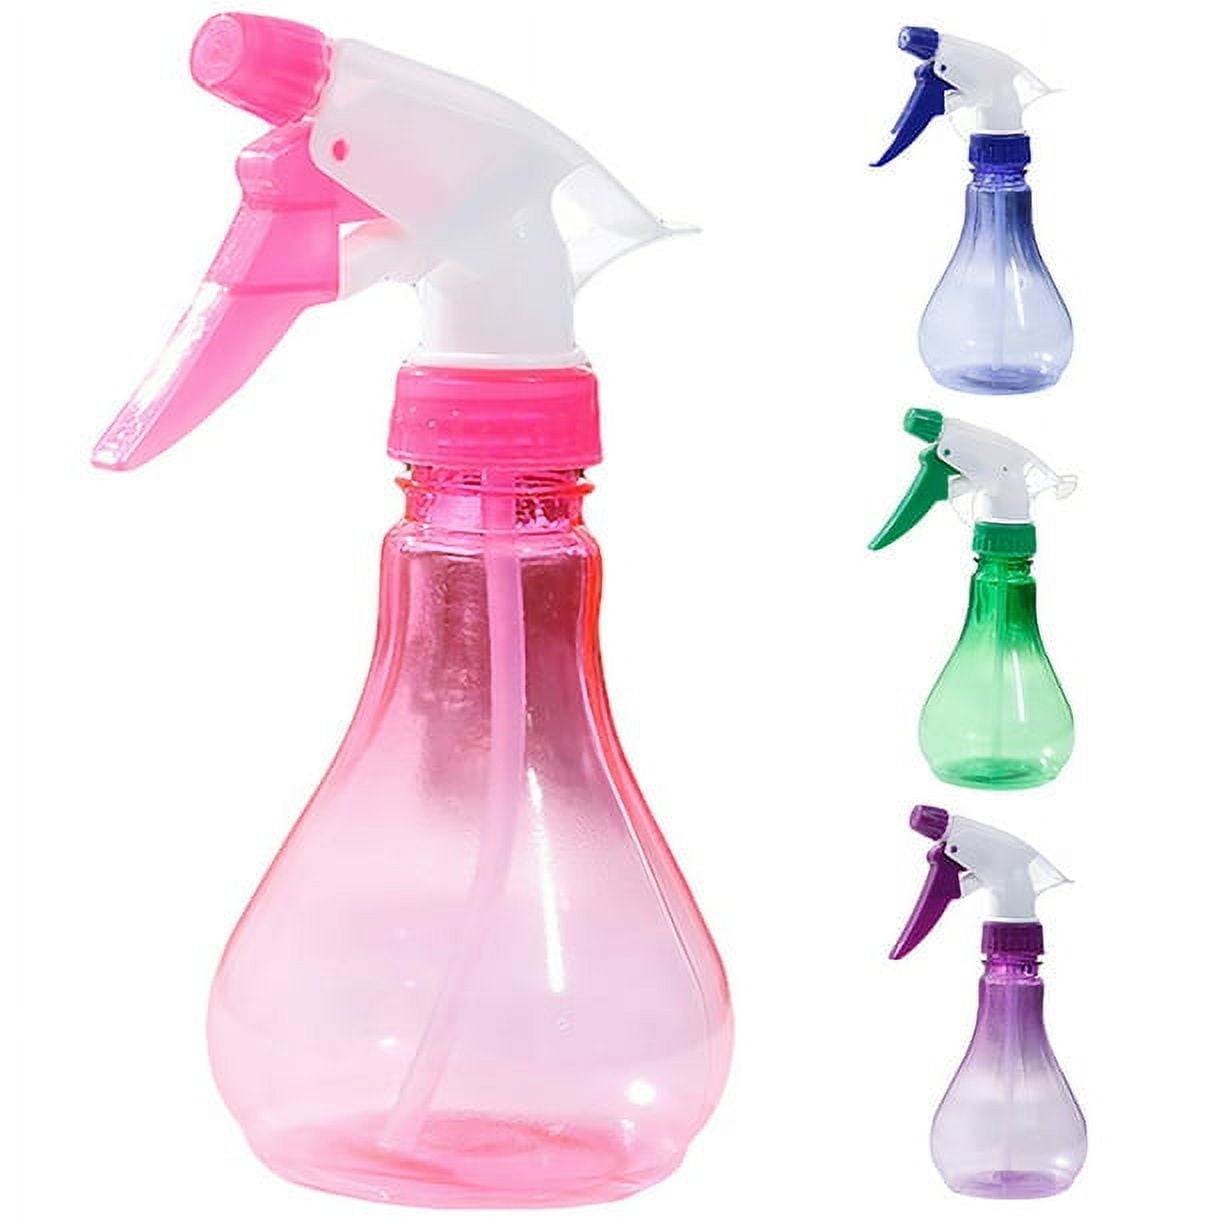 Bealee Spray Bottles (4 Pack, 24 Oz) Refillable Empty Plastic Water  Spraying Bottle for Cleaning Solutions, Hair Spray, Car Detail, Watering  Plants